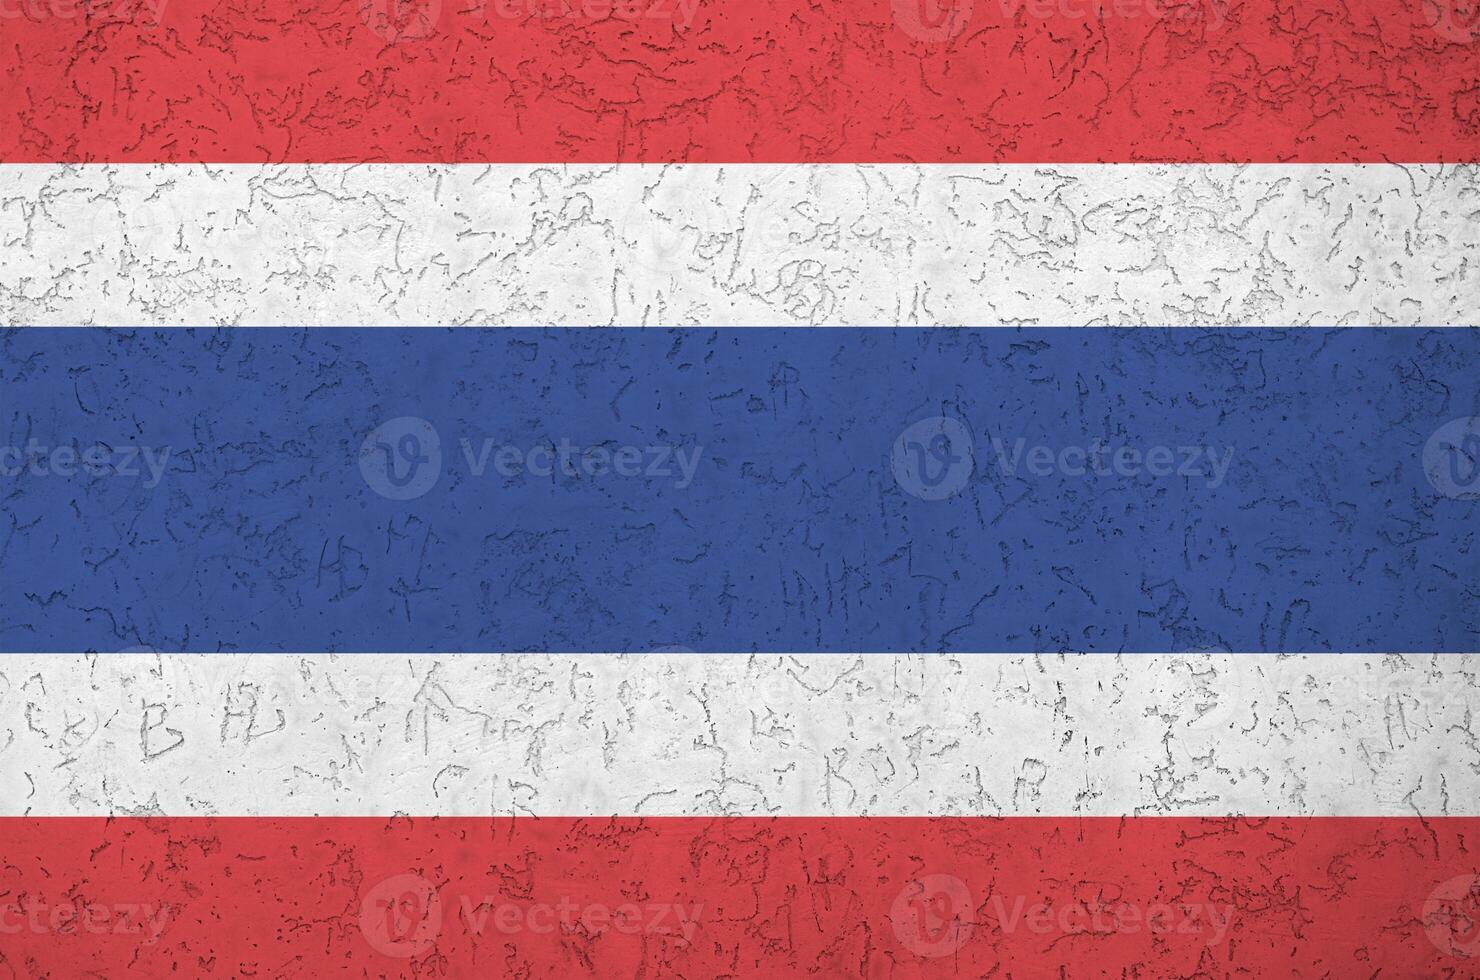 Thailand flag depicted in bright paint colors on old relief plastering wall. Textured banner on rough background photo